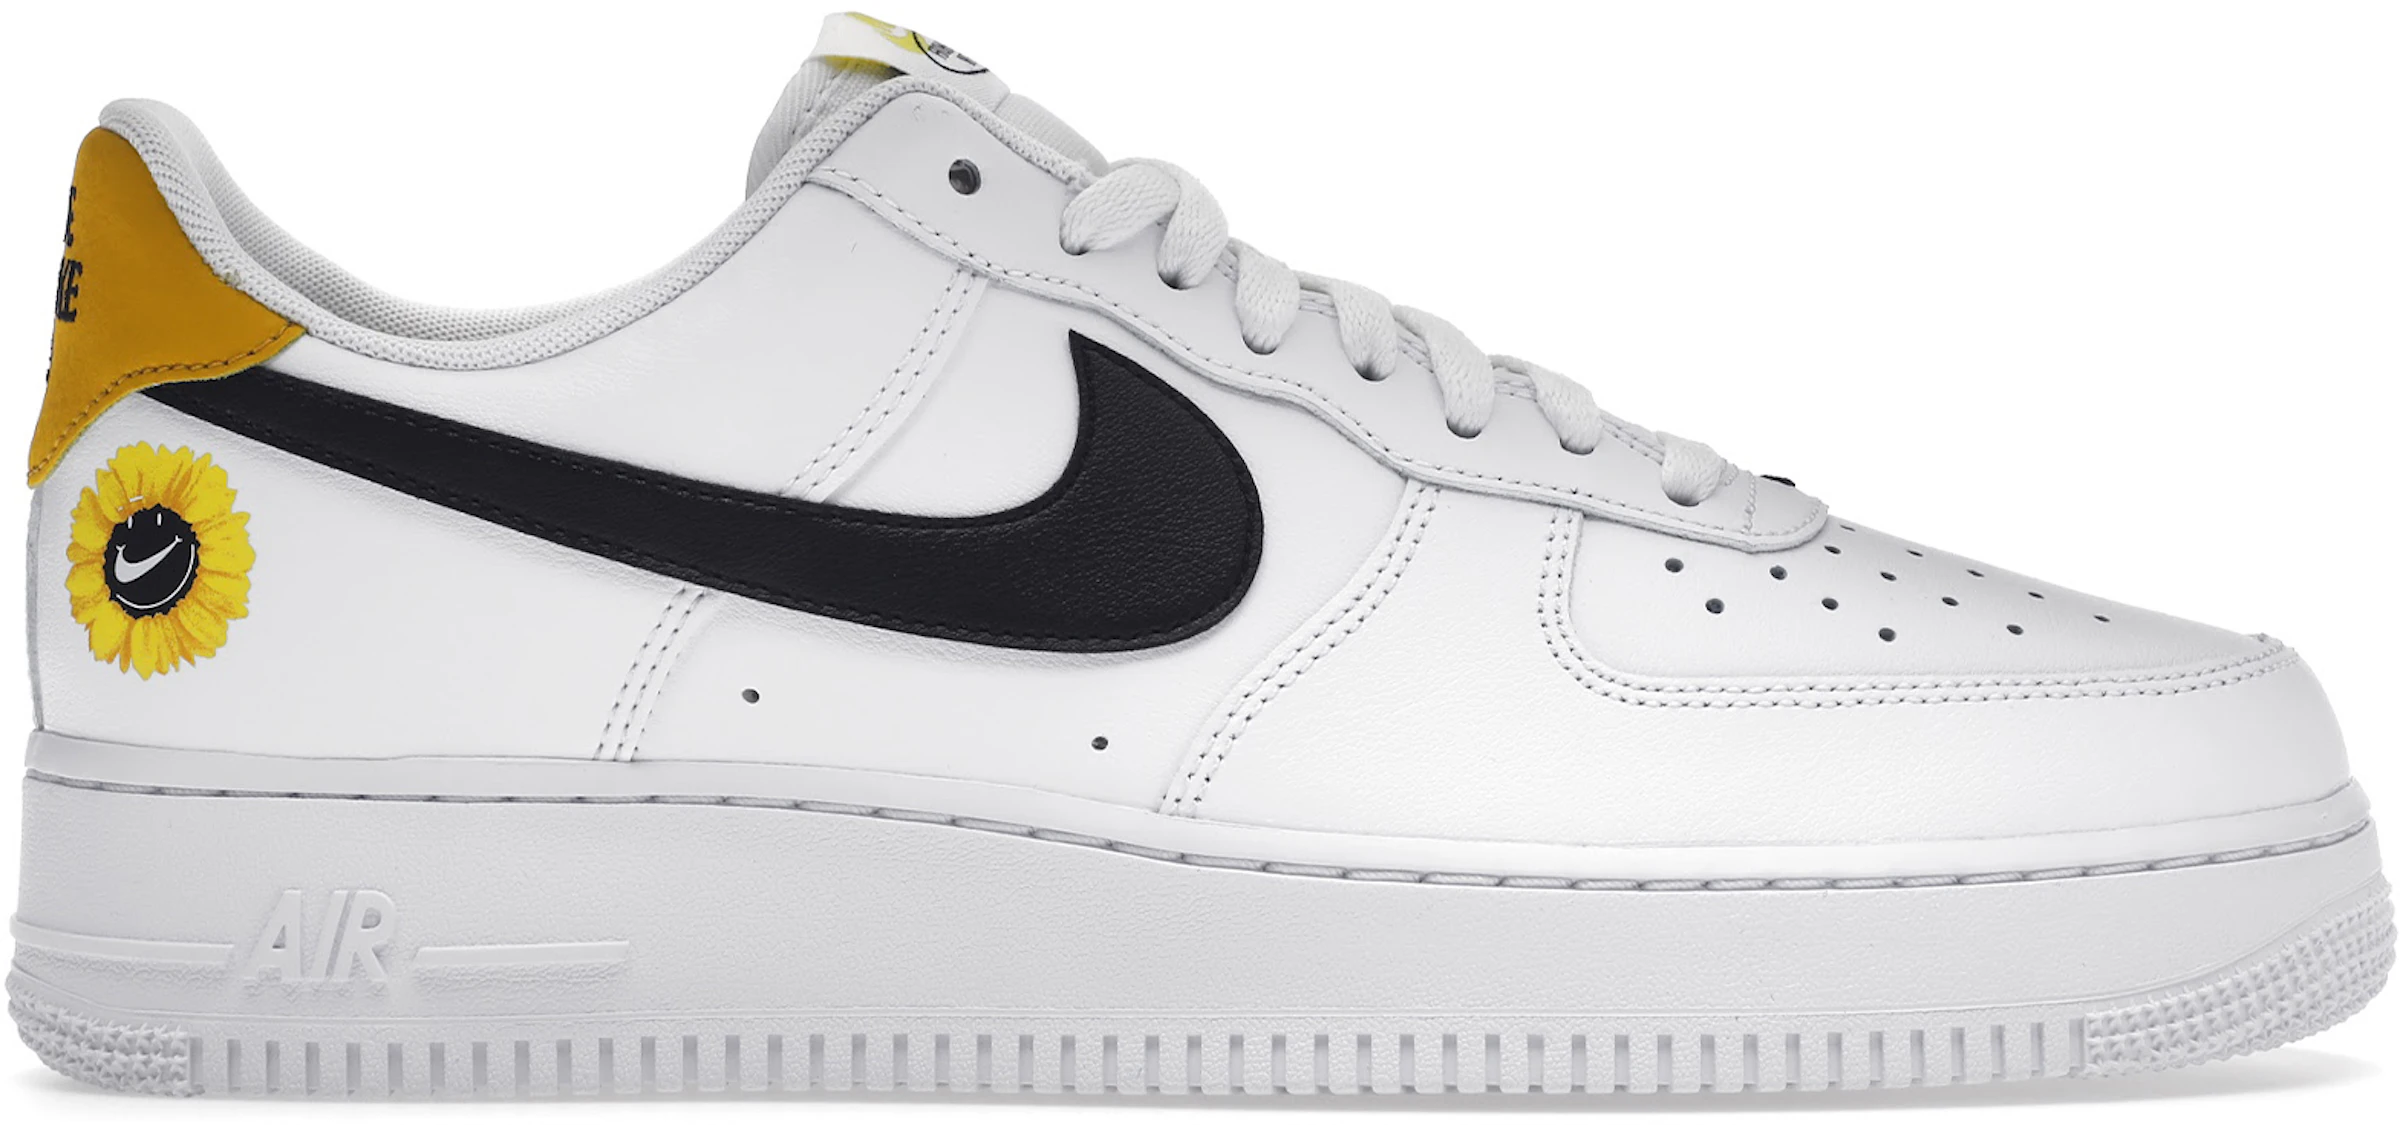 Nike Force 1 Low Have a Nike Day White Gold - DM0118-100 - US